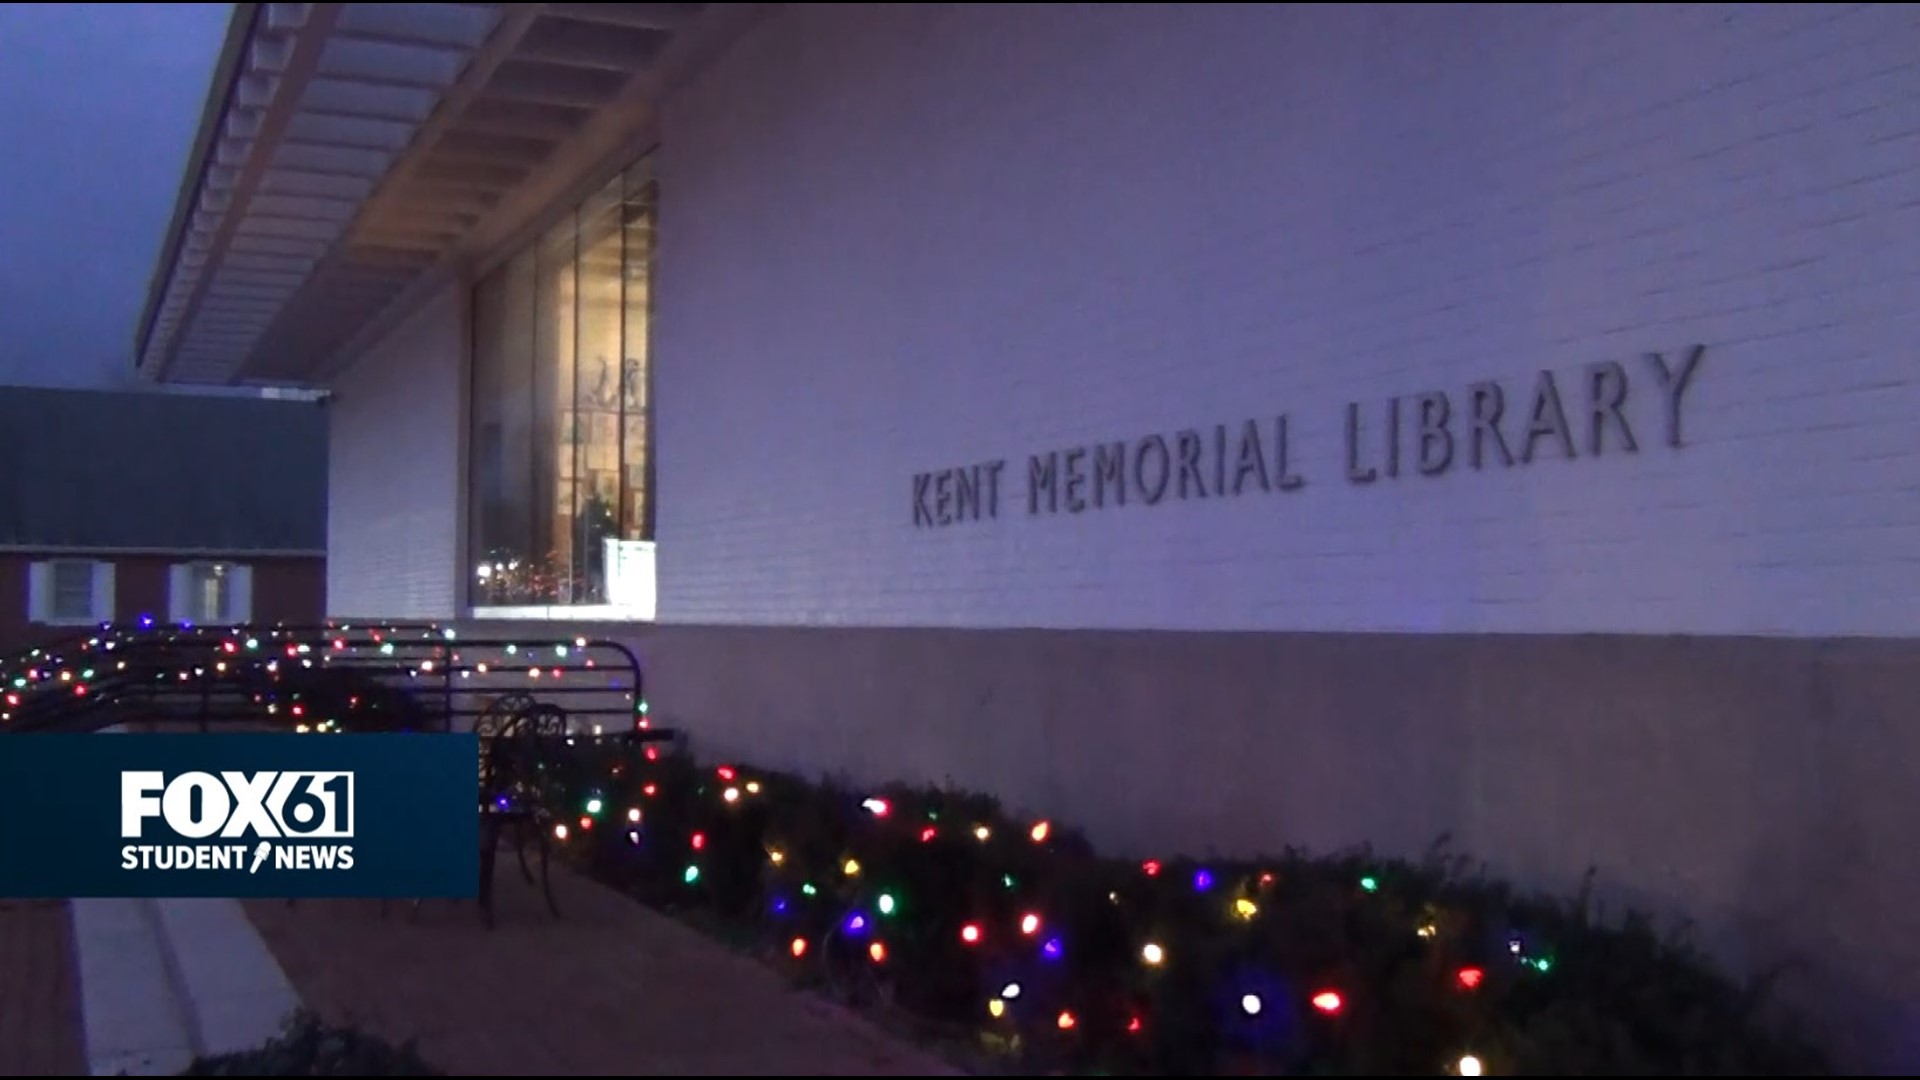 Suffield residents have reflected on the importance of the historical Kent Memorial Library in shaping their everyday lives.